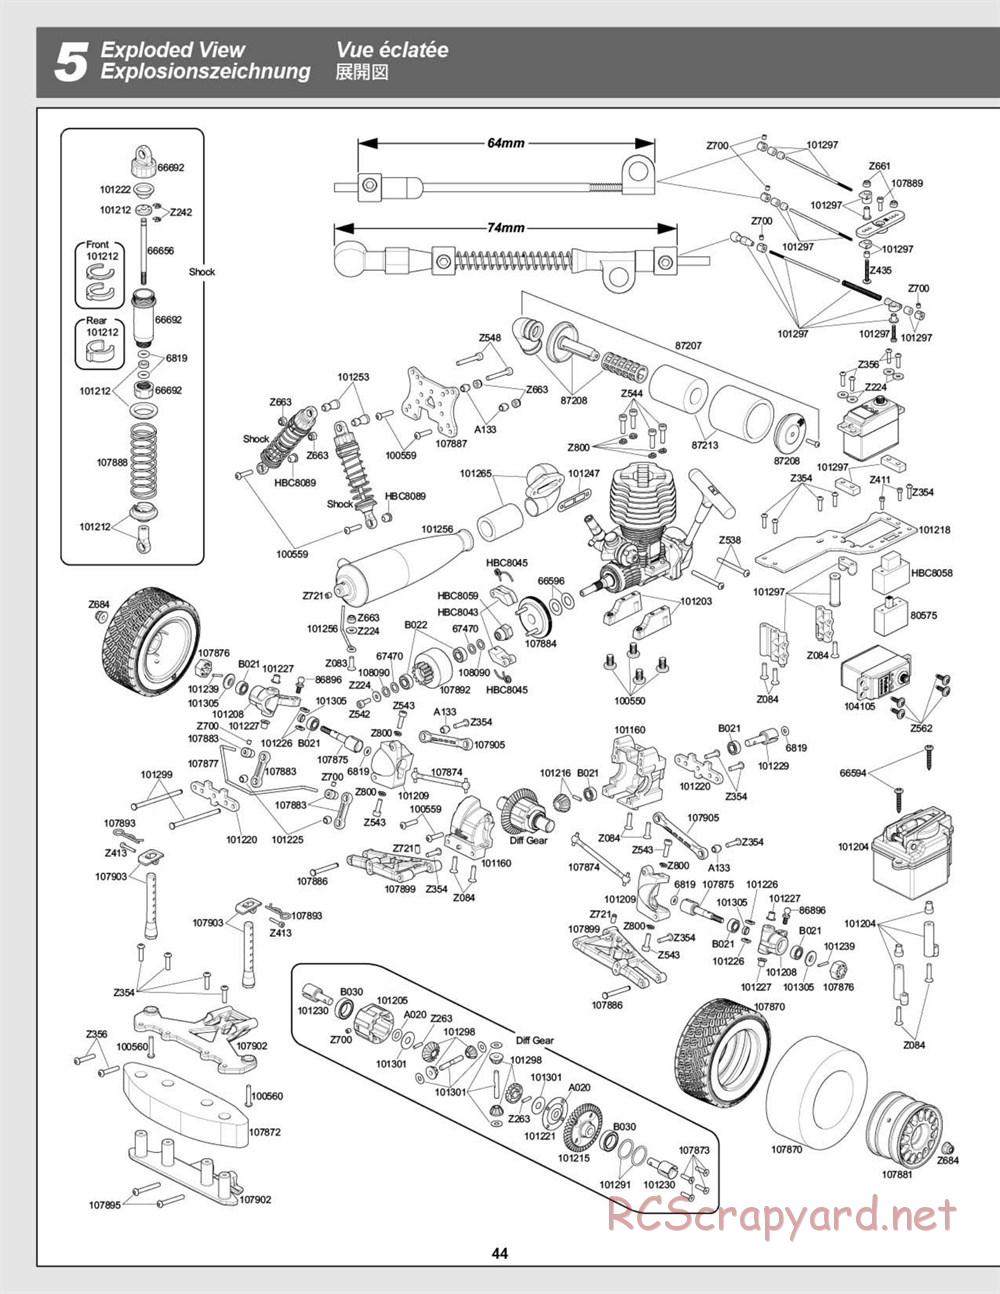 HPI - WR8 3.0 - Exploded View - Page 44